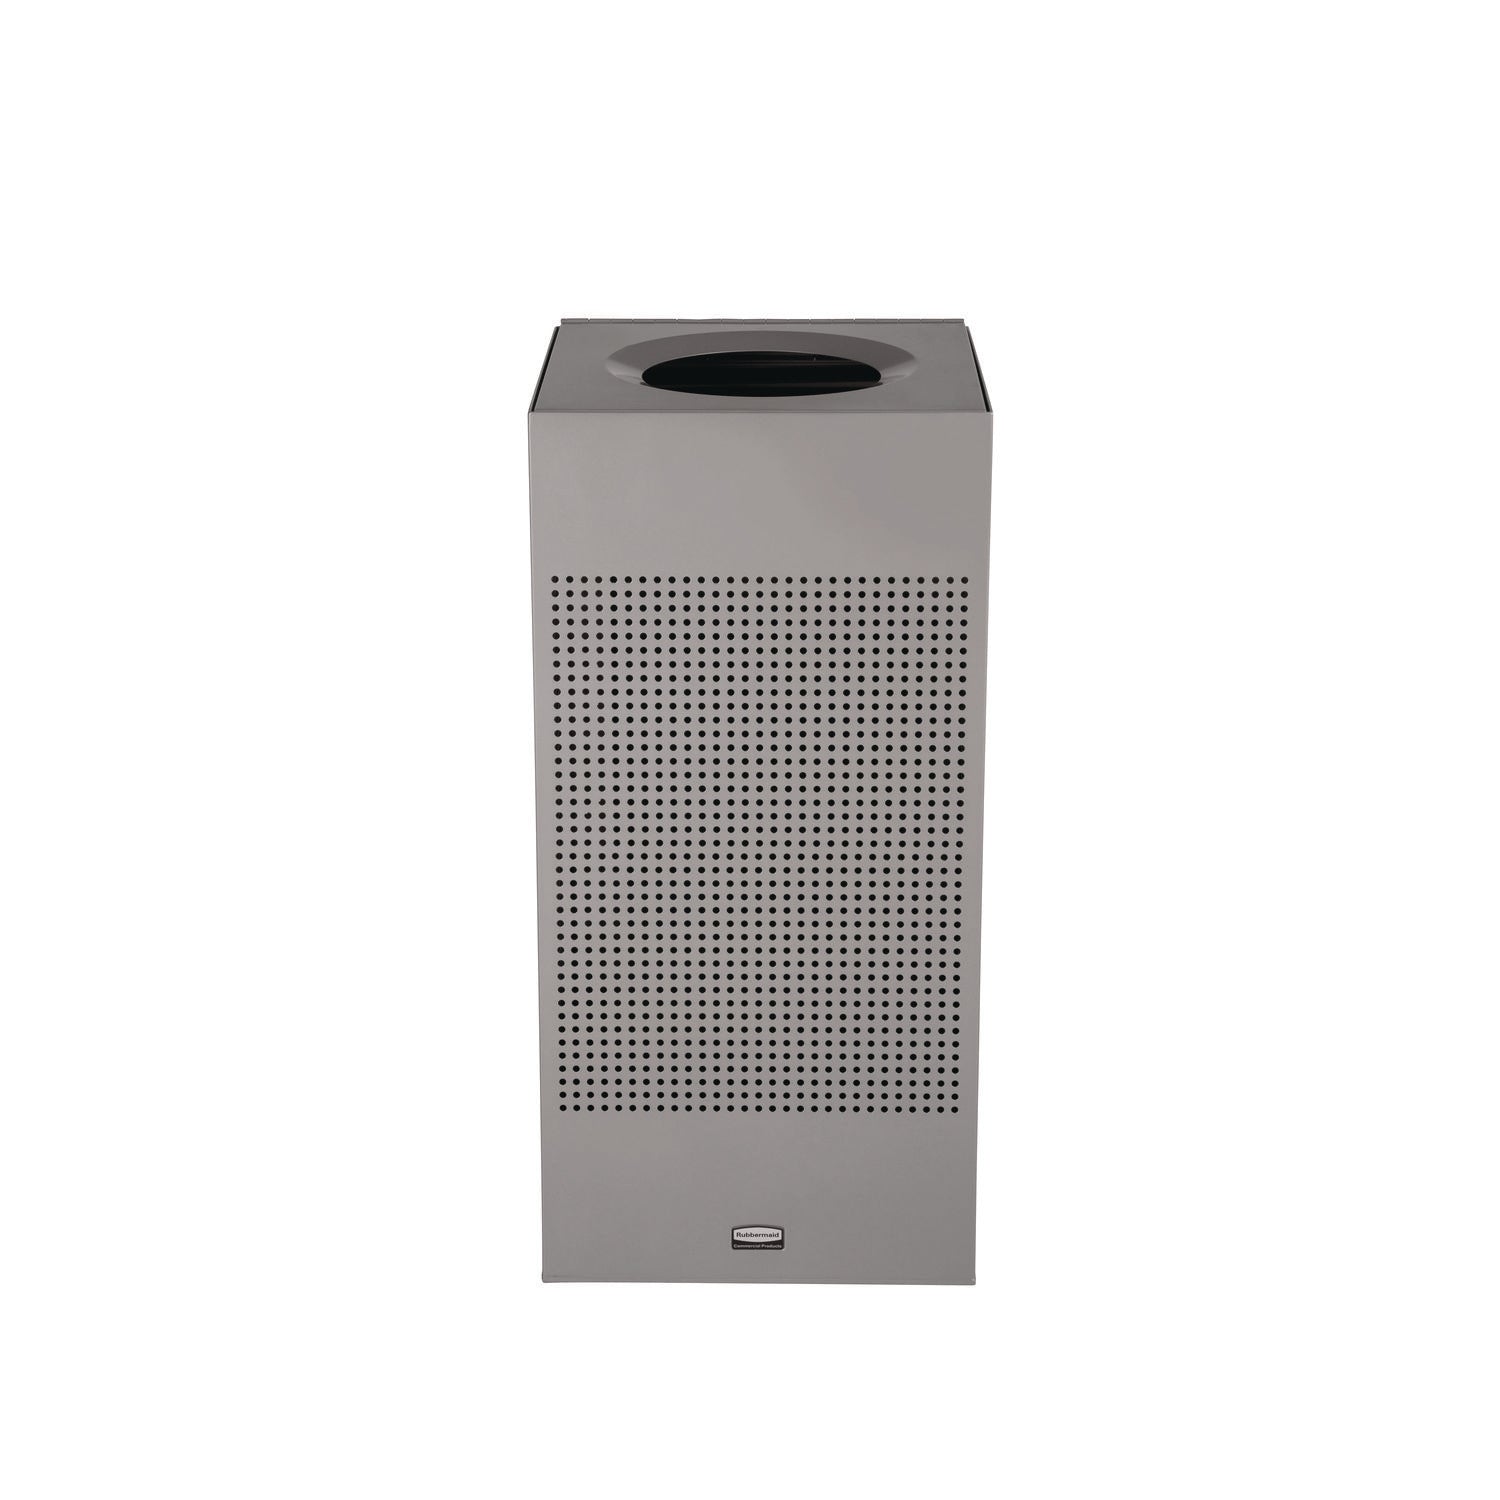 Rubbermaid Commercial Silhouettes 16G Waste Container - 16 gal Capacity - Square - Perforated, Fire-Safe, Durable - 30.4" Height x 14.8" Width x 14.8" Depth - Steel, Metal - Silver Metallic - 1 Each - 1